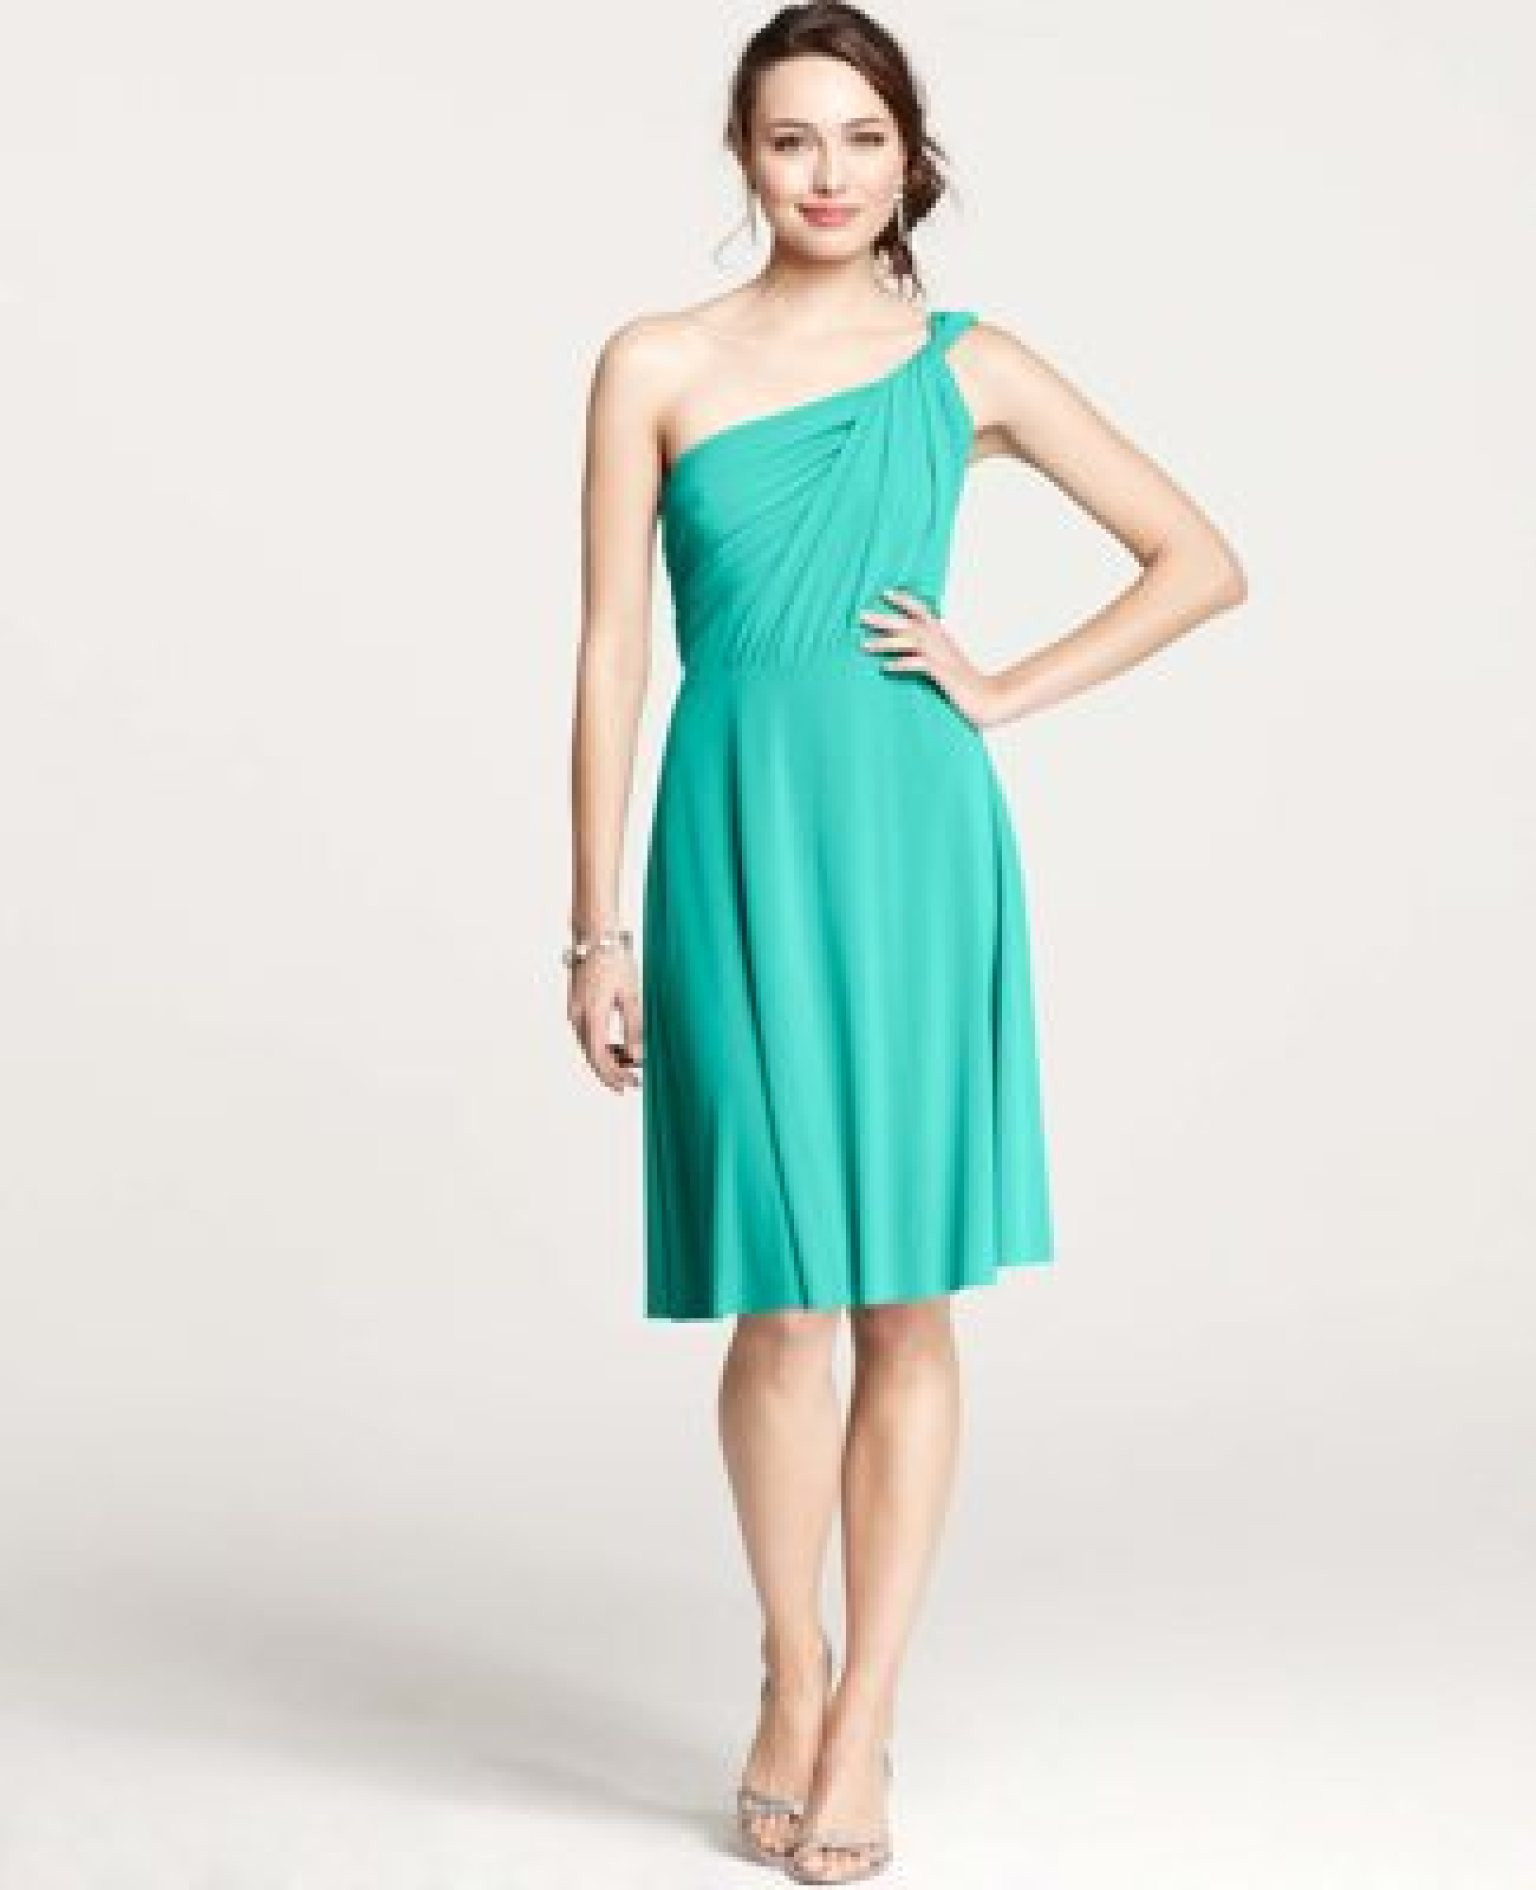 Dresses To Wear To A Wedding As A Guest
 Wedding Guest Dresses For Summer Affairs PHOTOS